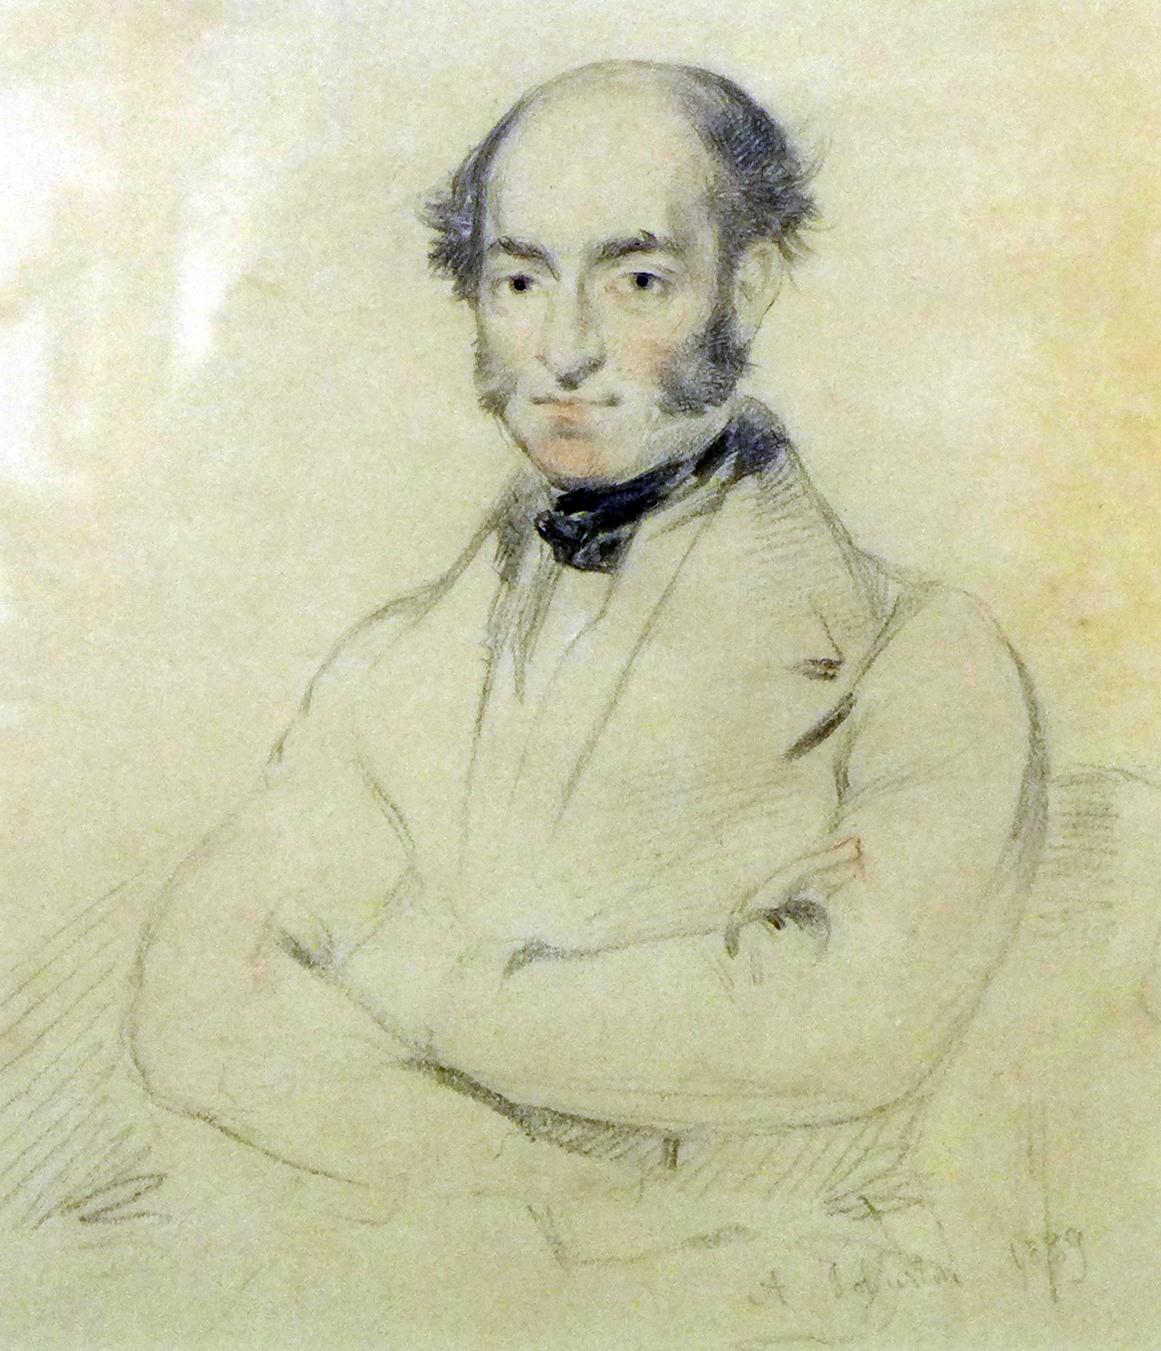 Alexander Johnston (1815-1891), portrait of a gentleman, pencil on paper, signed and dated 1889 to